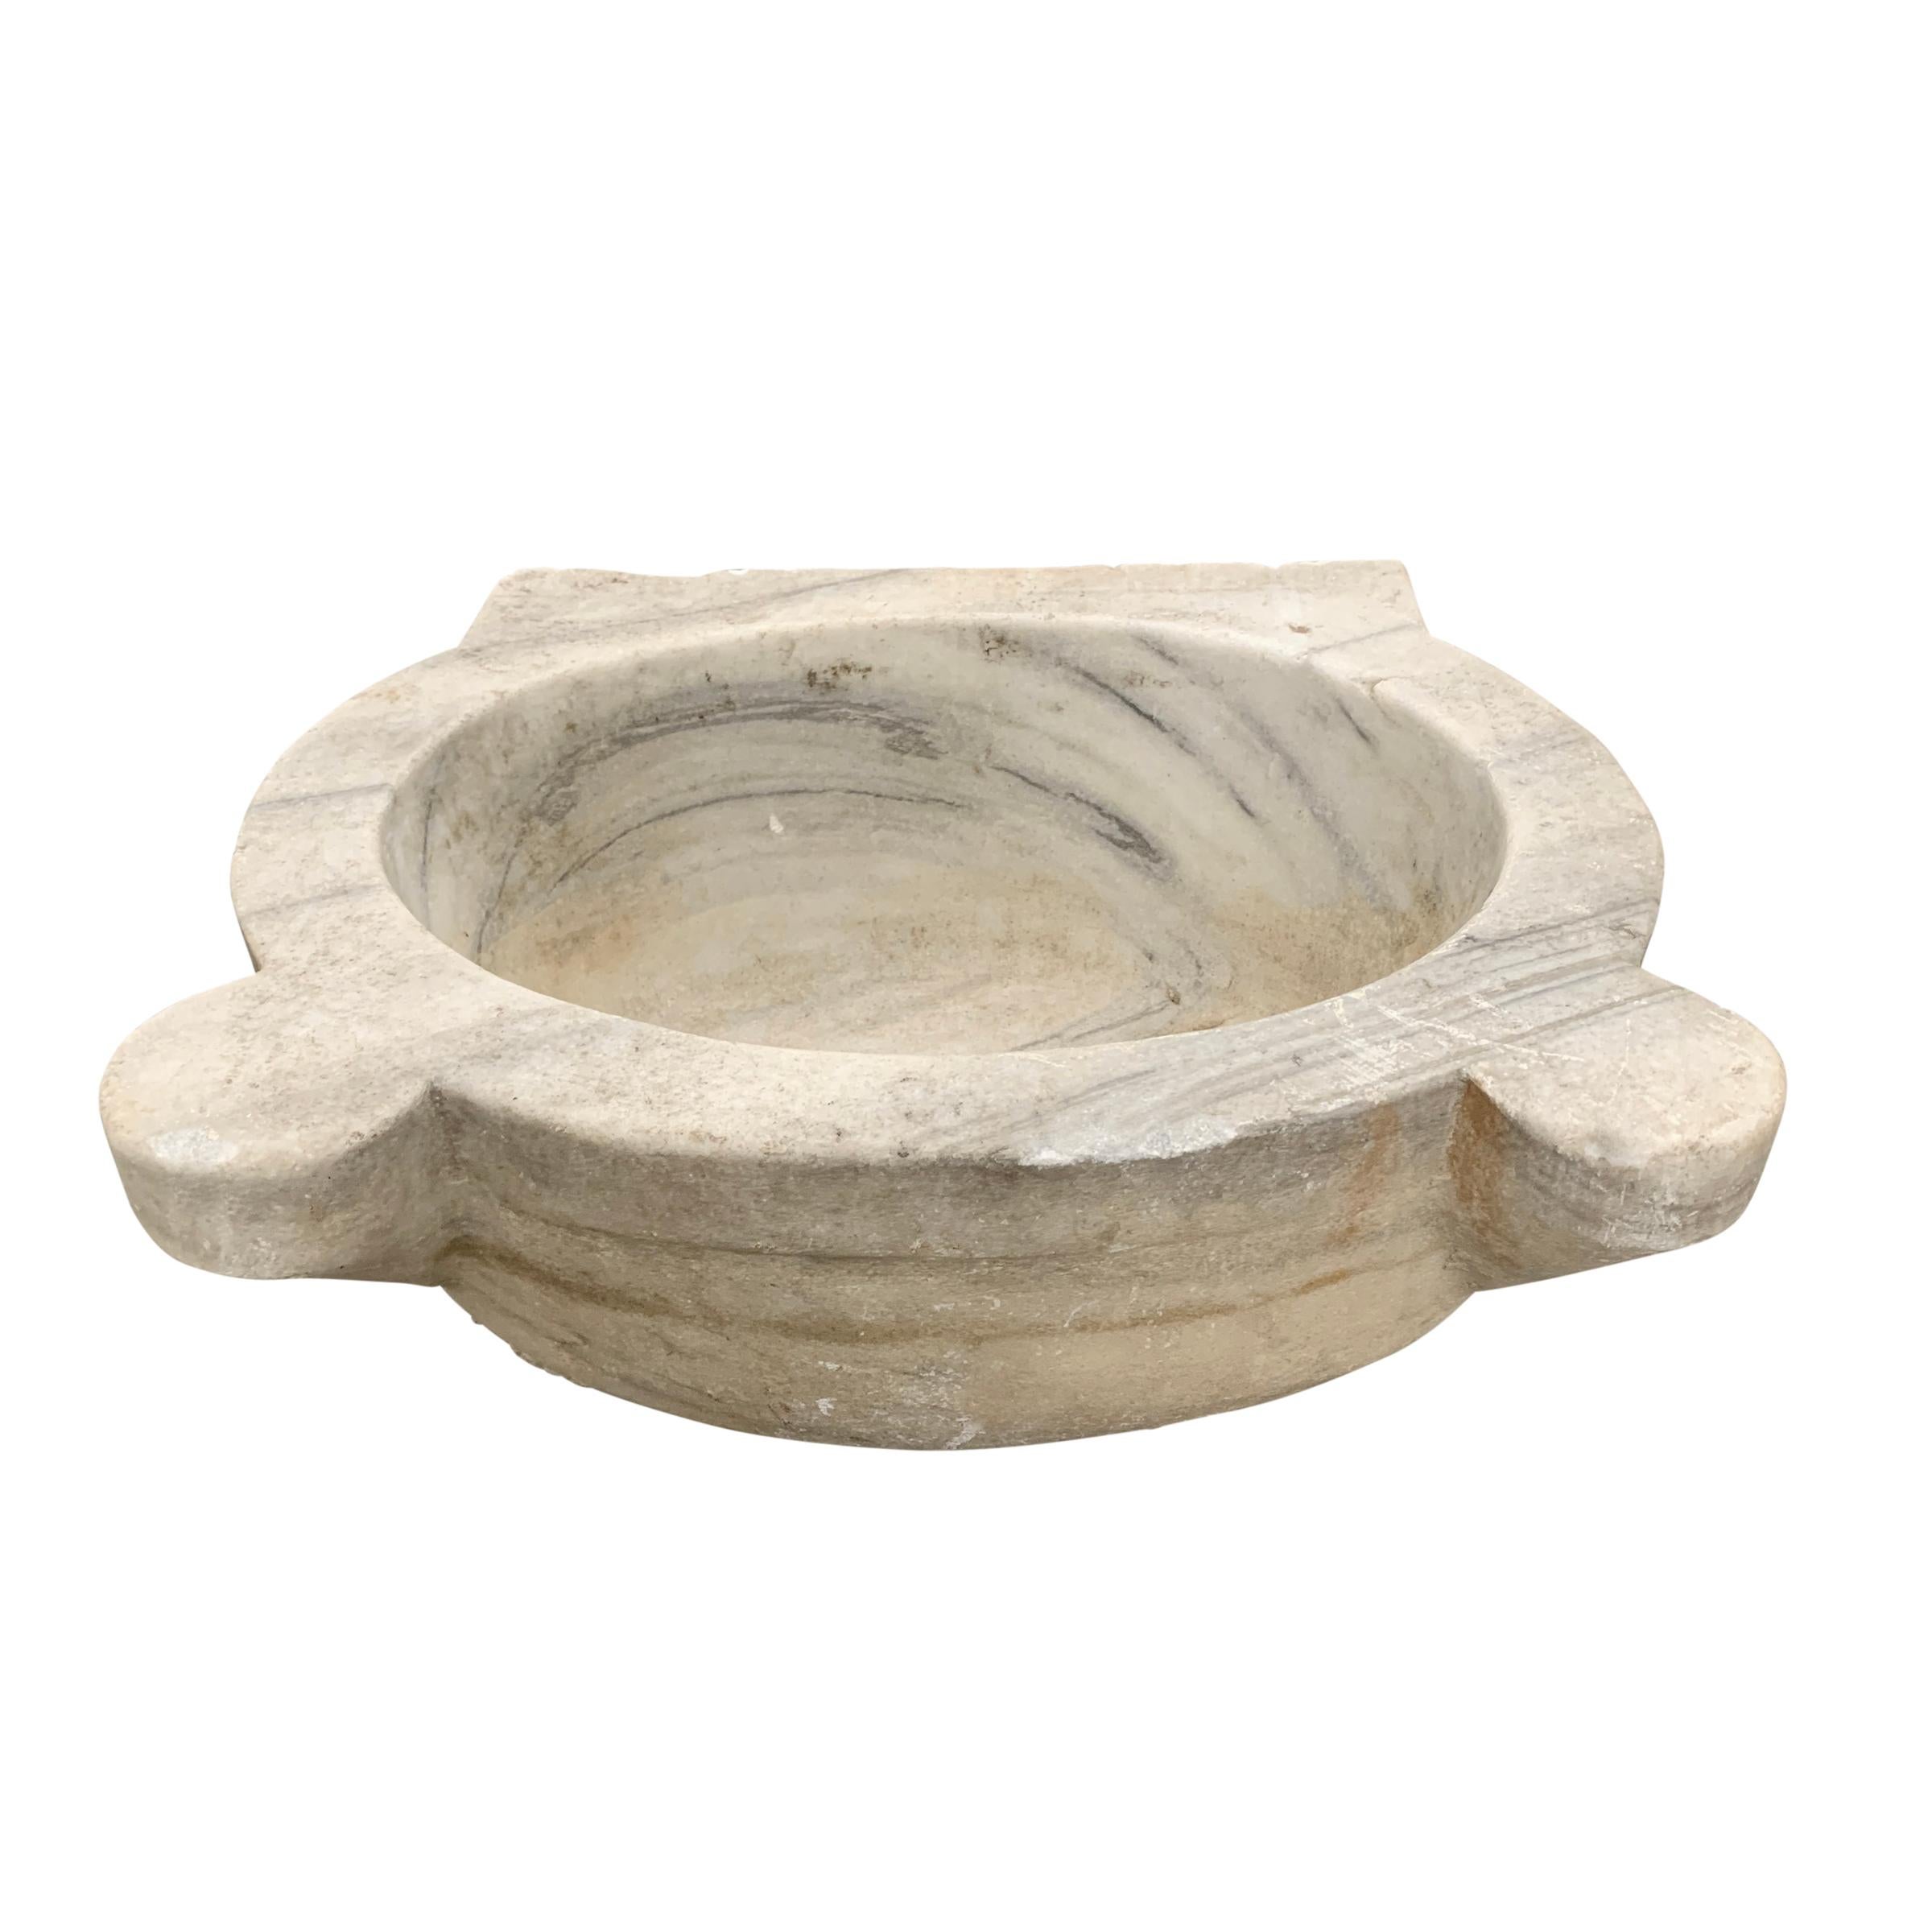 A wonderful 18th century Turkish Hammam carved white marble sink vessel with a wonderfully worn finish. A drain could be drilled in the bottom to convert into a sink.

Interior dimension: 14.75 in. W x 11.25 in. D x 6 in. H.